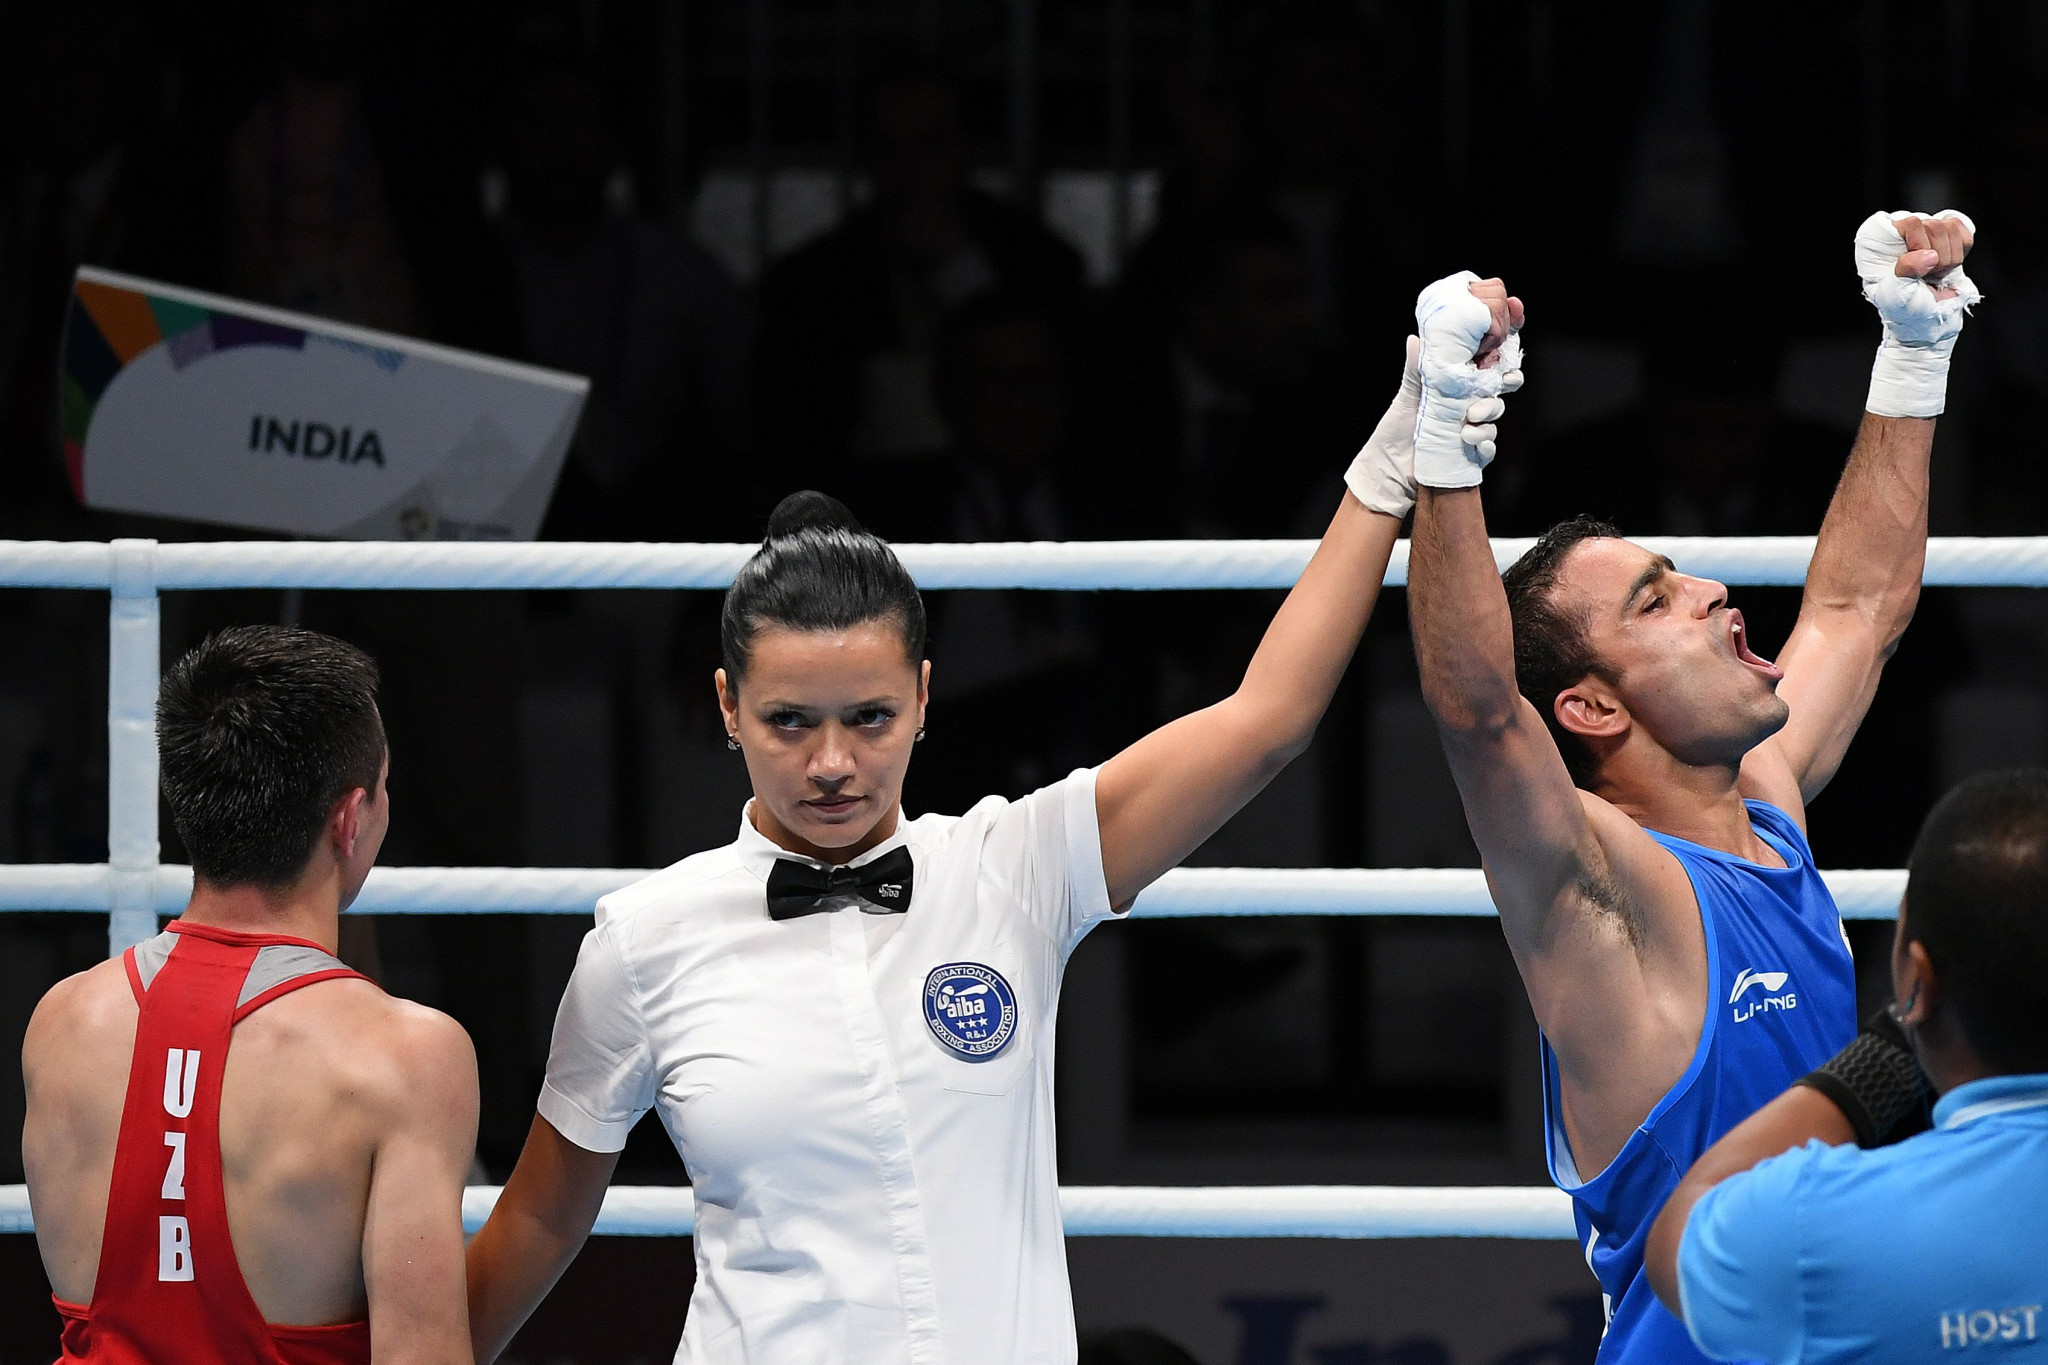 Amit Panghal beat the Olympic champion from Uzbekistan to win gold in Jakarta ©Getty Images